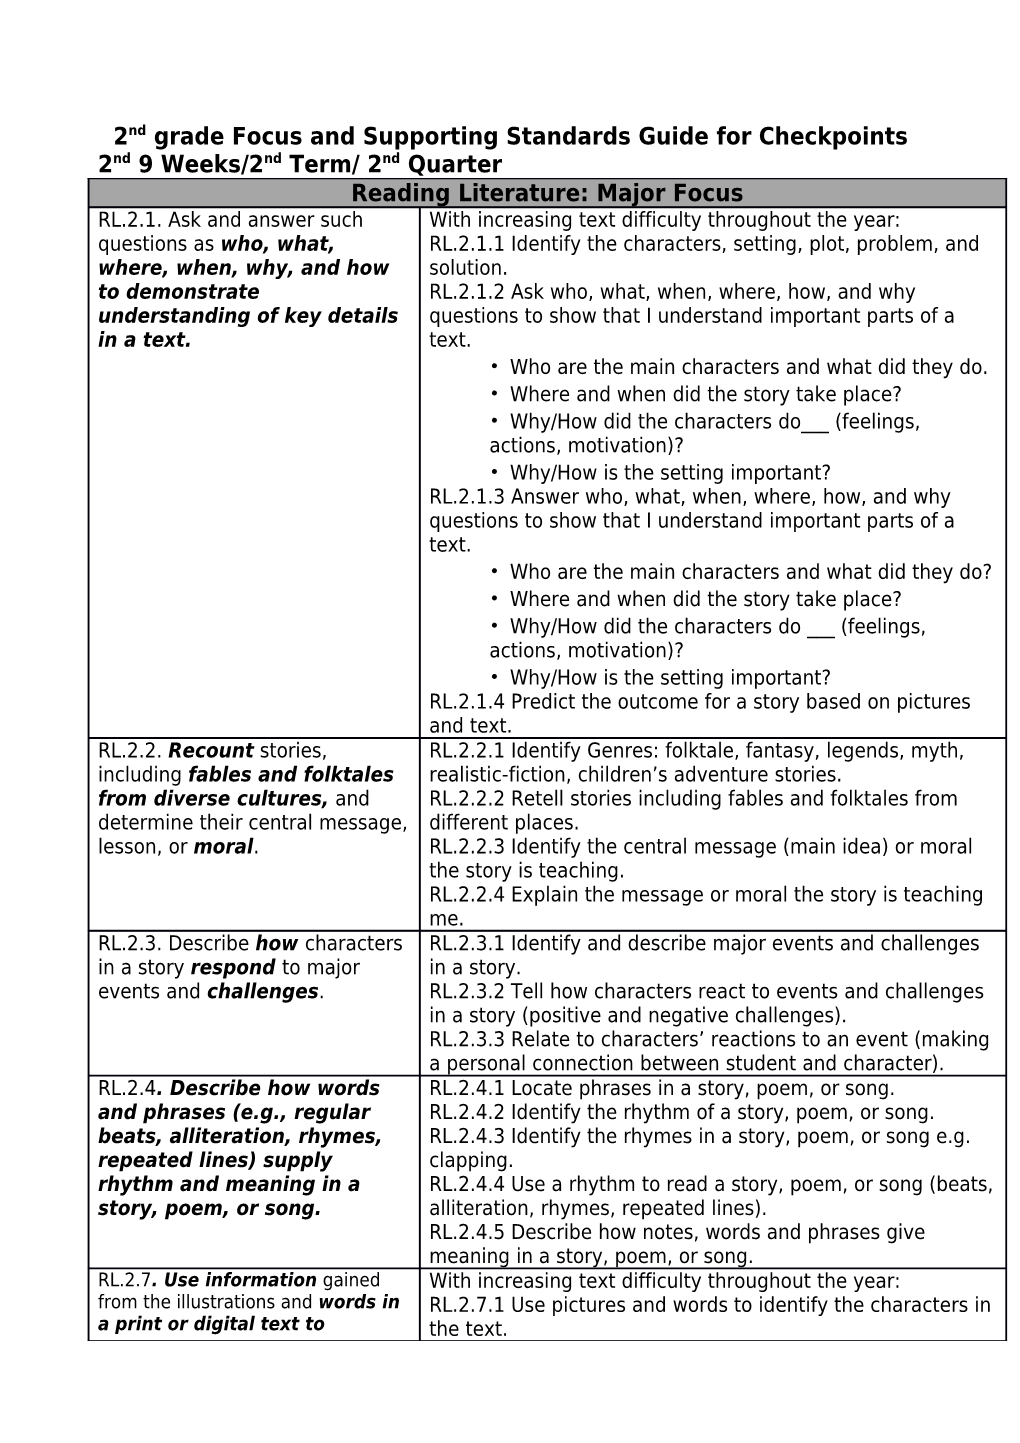 2Nd Grade Focus and Supporting Standards Guide for Checkpoints